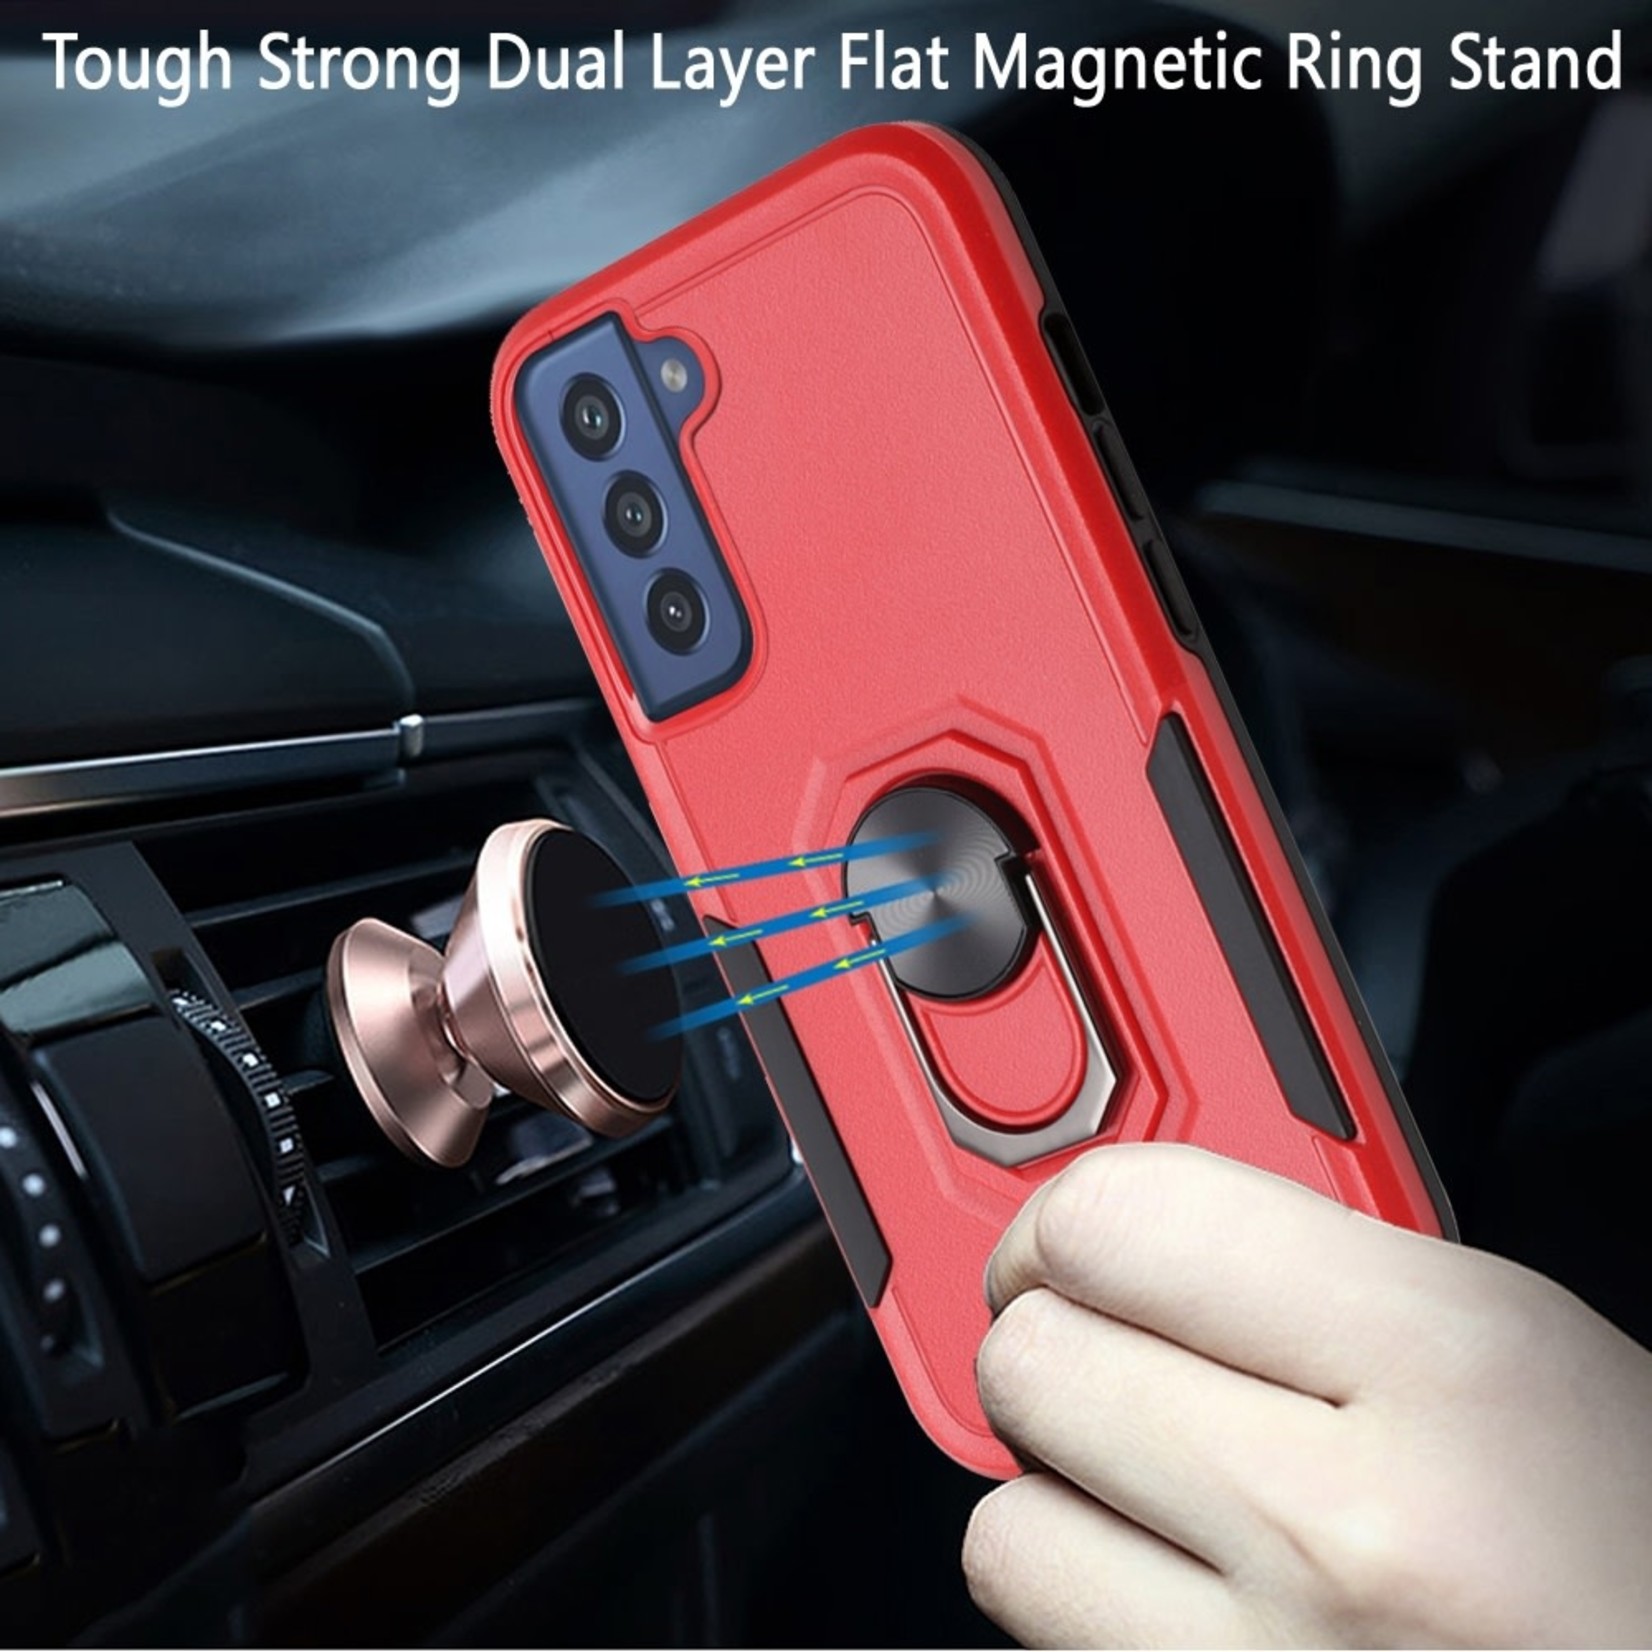 Samsung Tough Strong Dual Layer Flat Magnetic Ring Stand Case Cover - Red For Samsung Galaxy S22